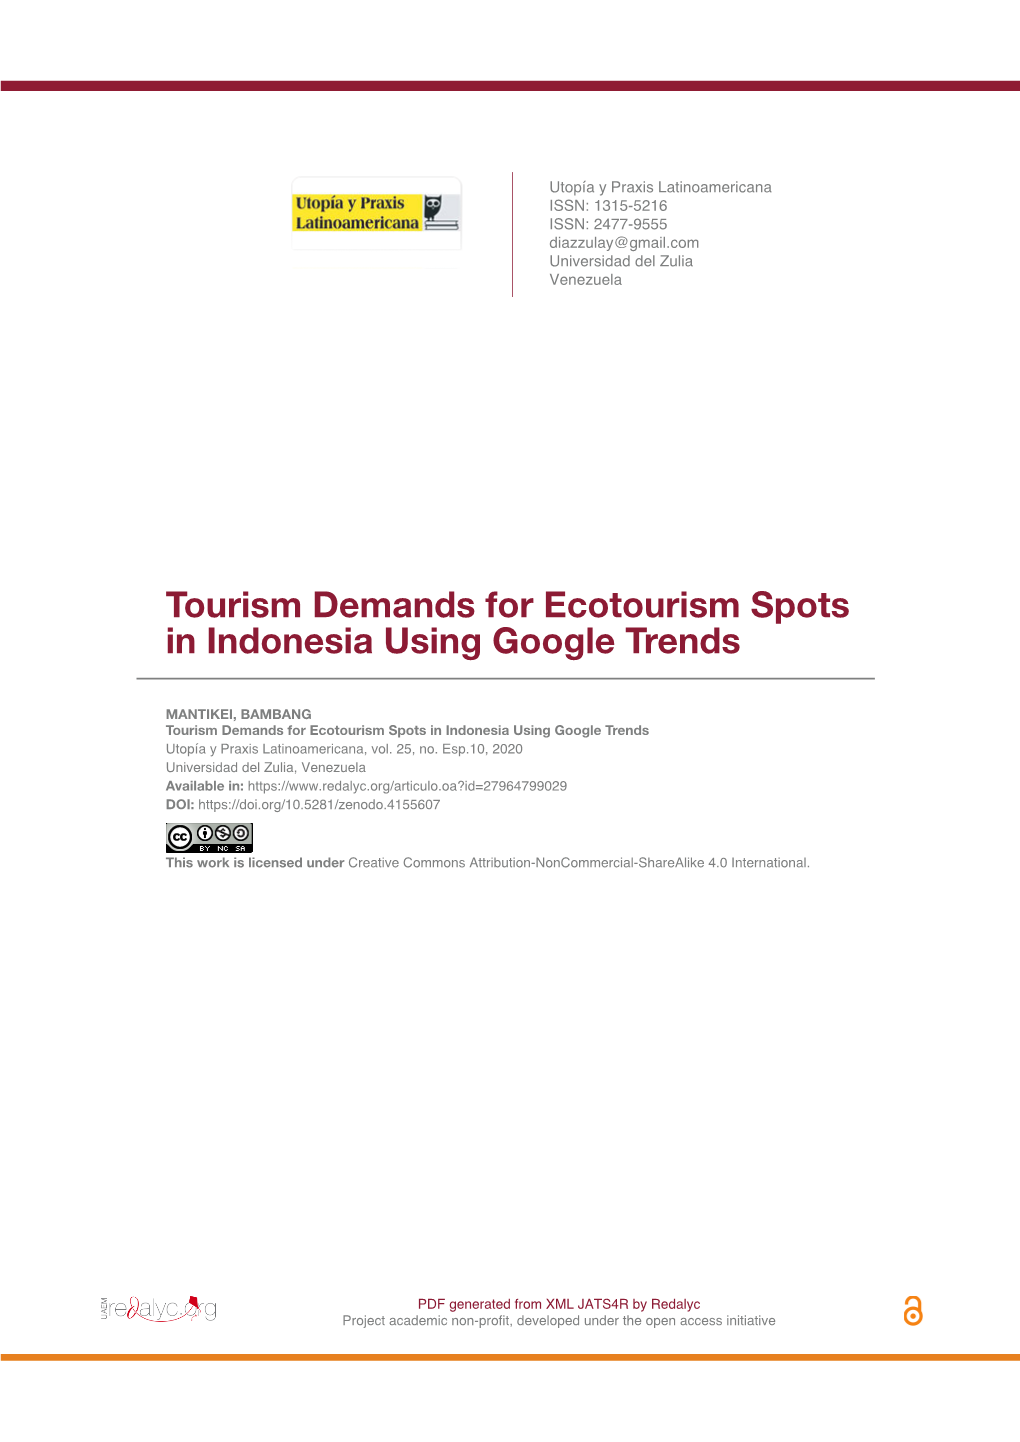 Tourism Demands for Ecotourism Spots in Indonesia Using Google Trends